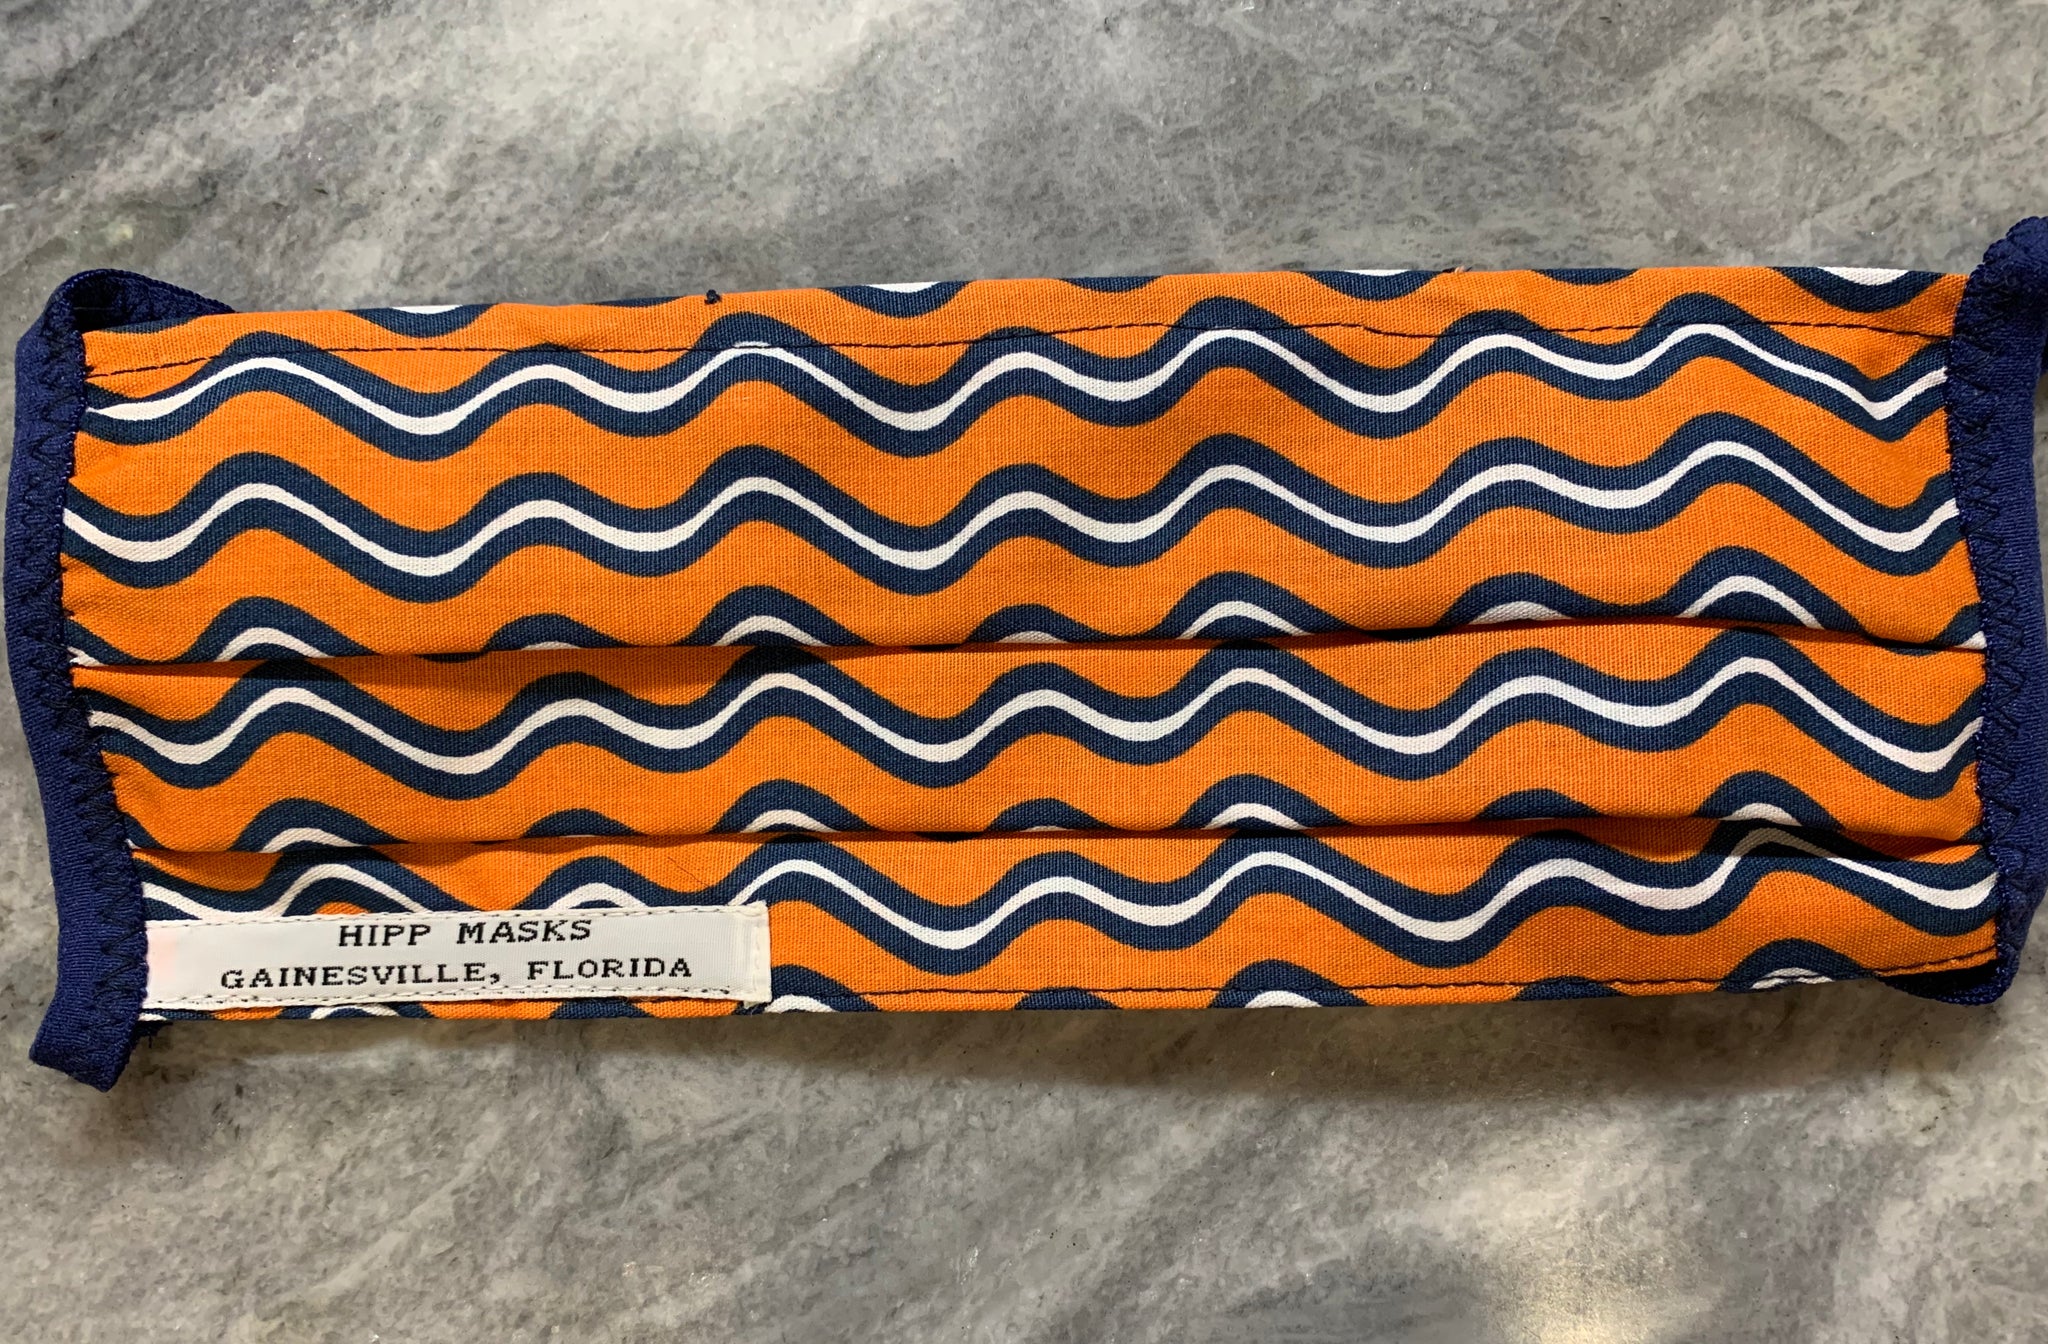 Who's in the President' Box?   Fancy Wavy Orange and Blue Print with Blue Foldover Elastic for Ears